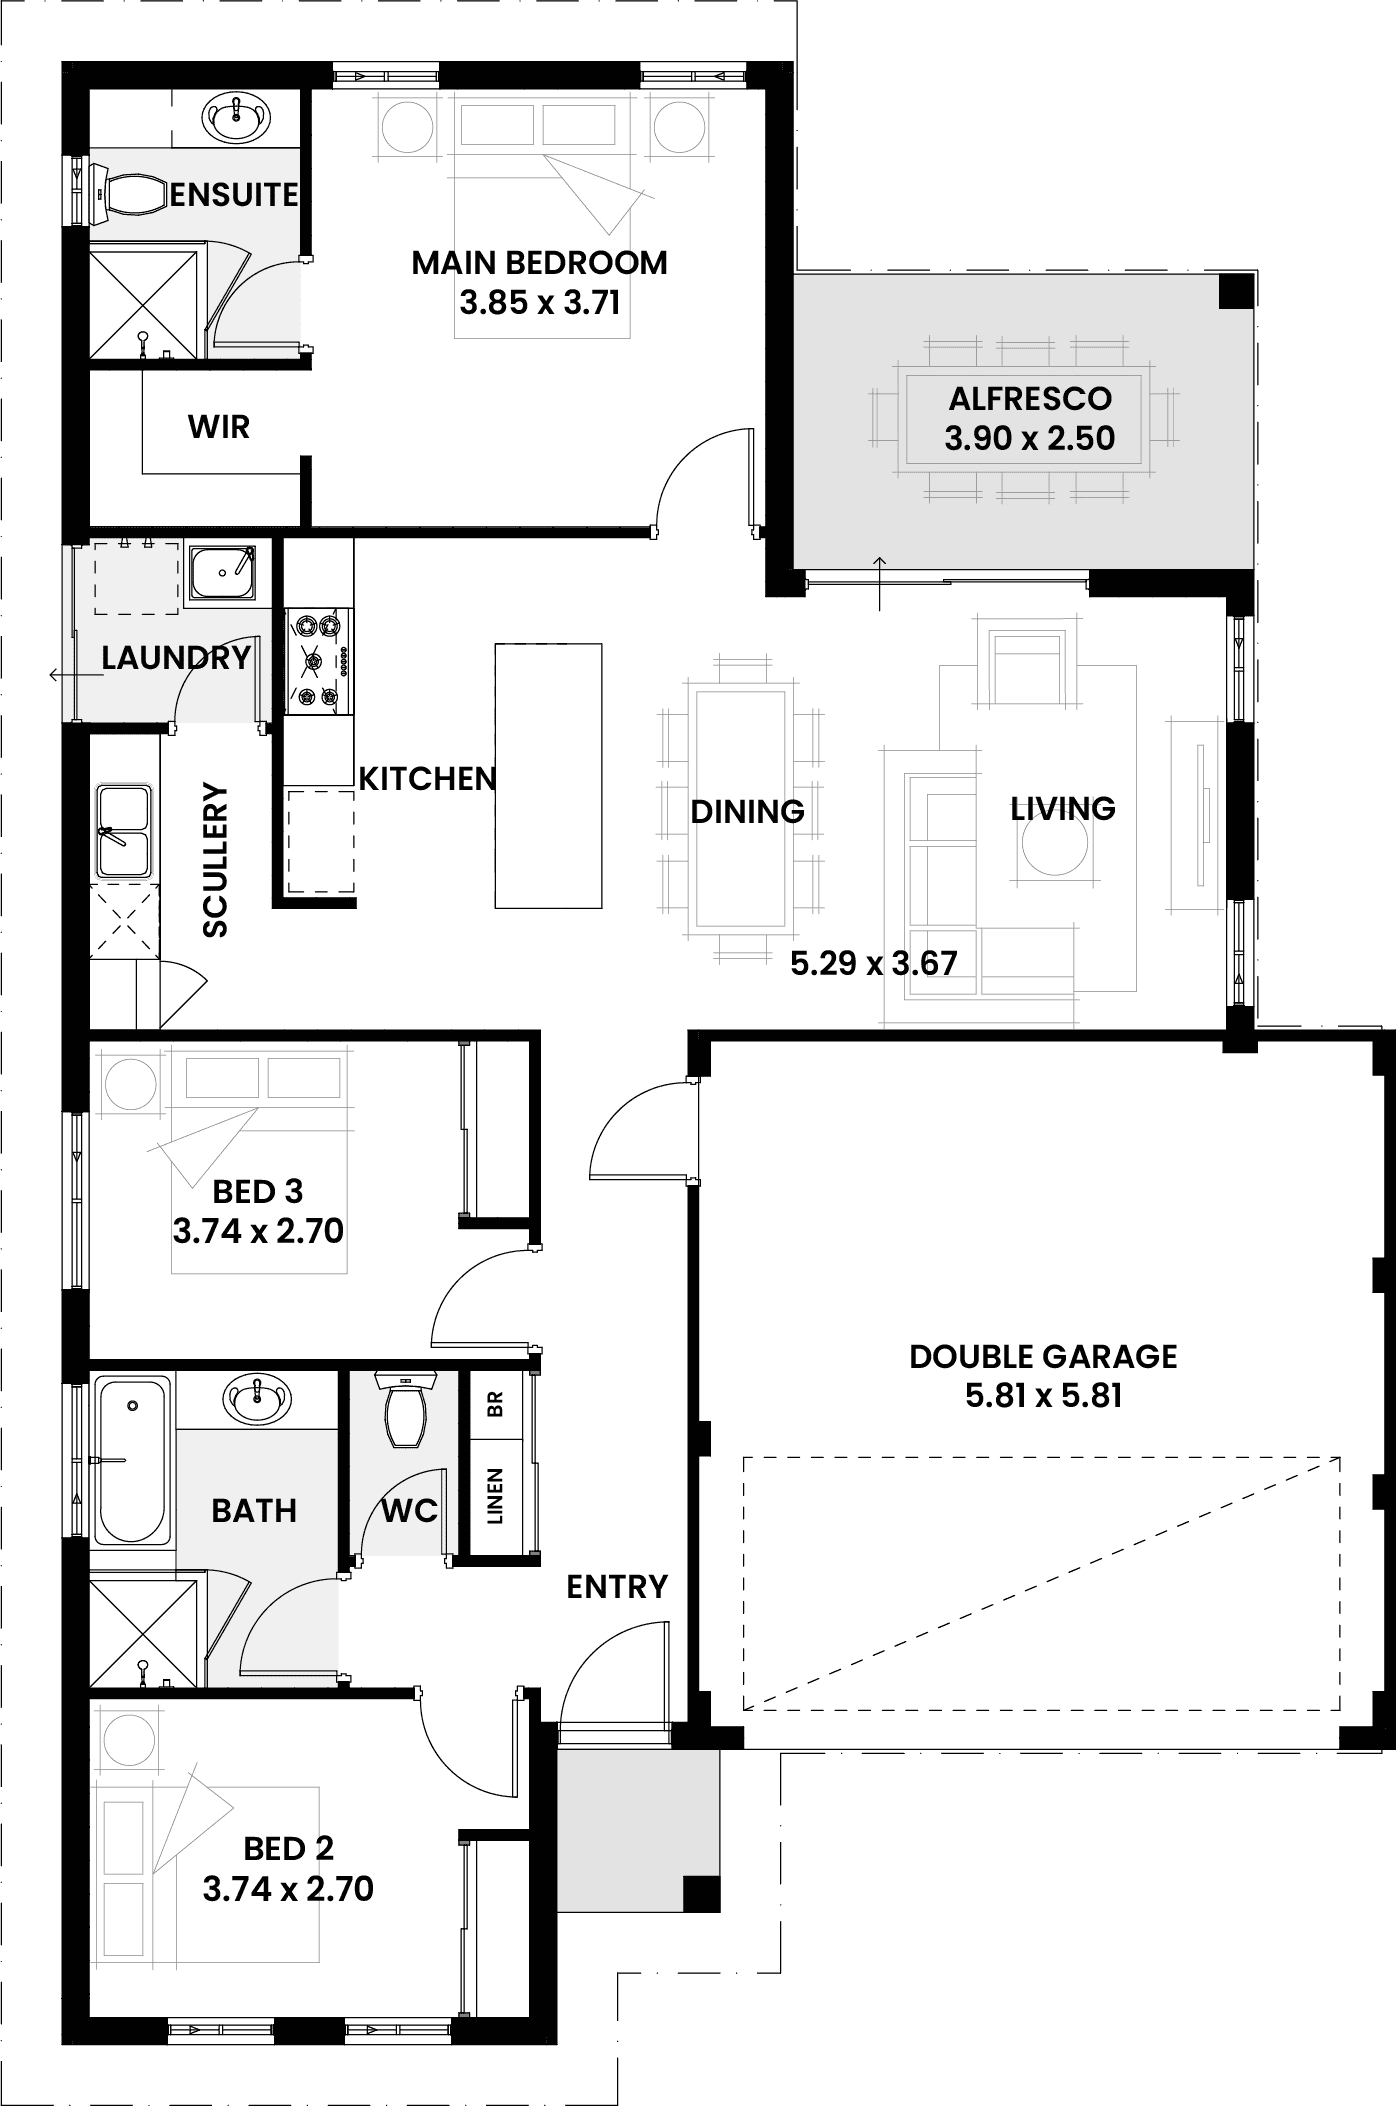 Floorplan for The Lilac, a Move Homes new home design perfect for first time buyers and new builders in Perth